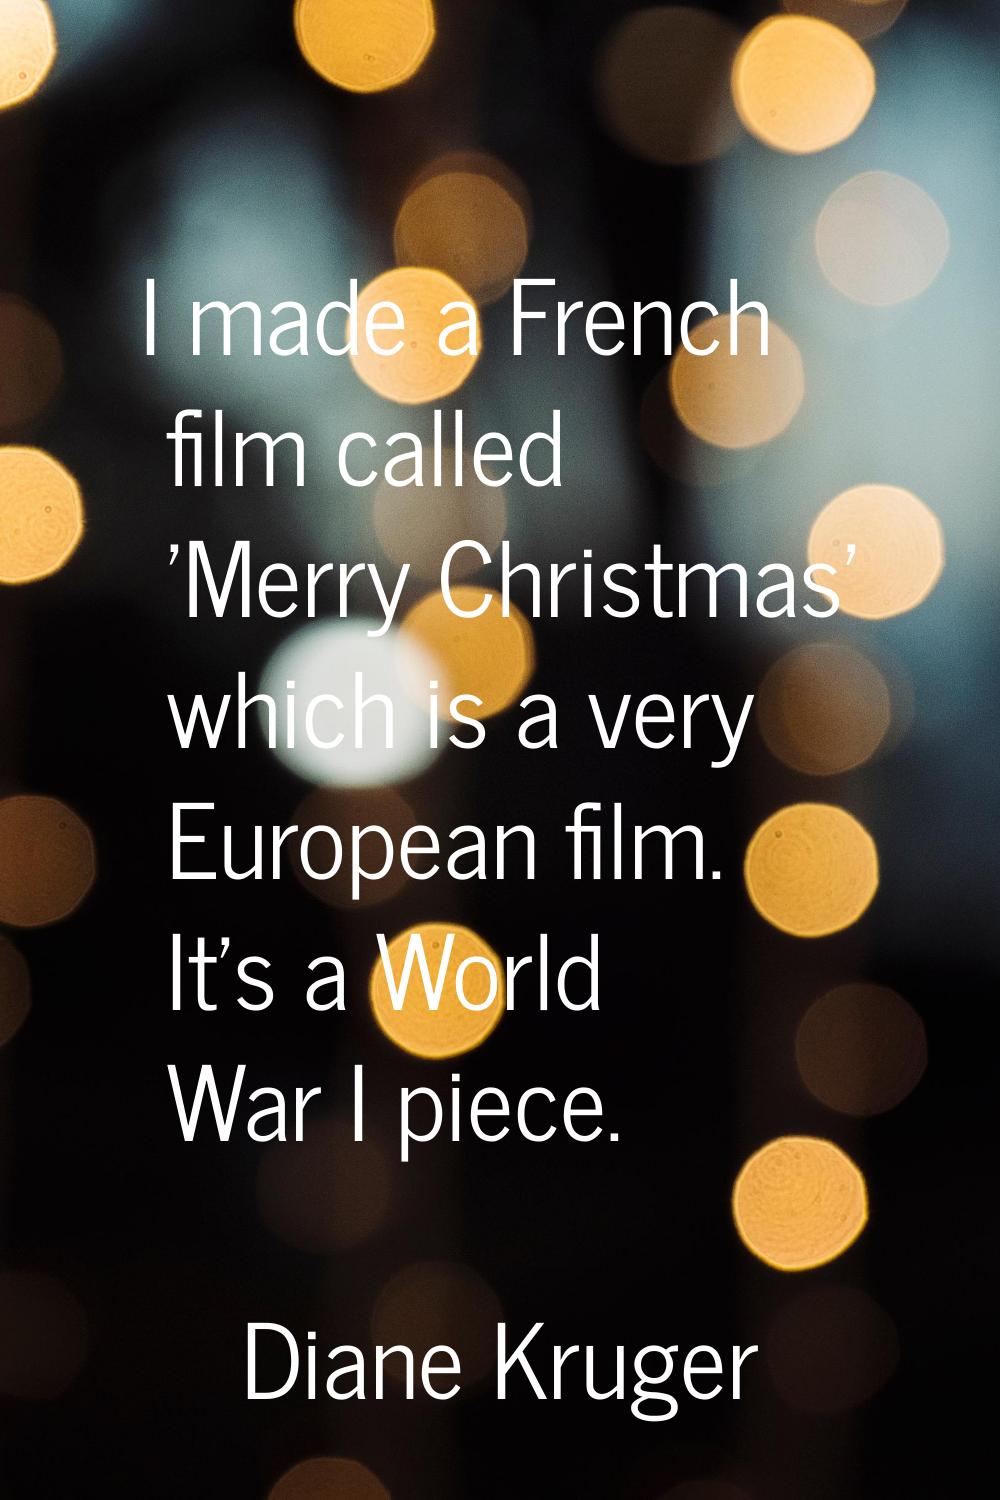 I made a French film called 'Merry Christmas' which is a very European film. It's a World War I pie